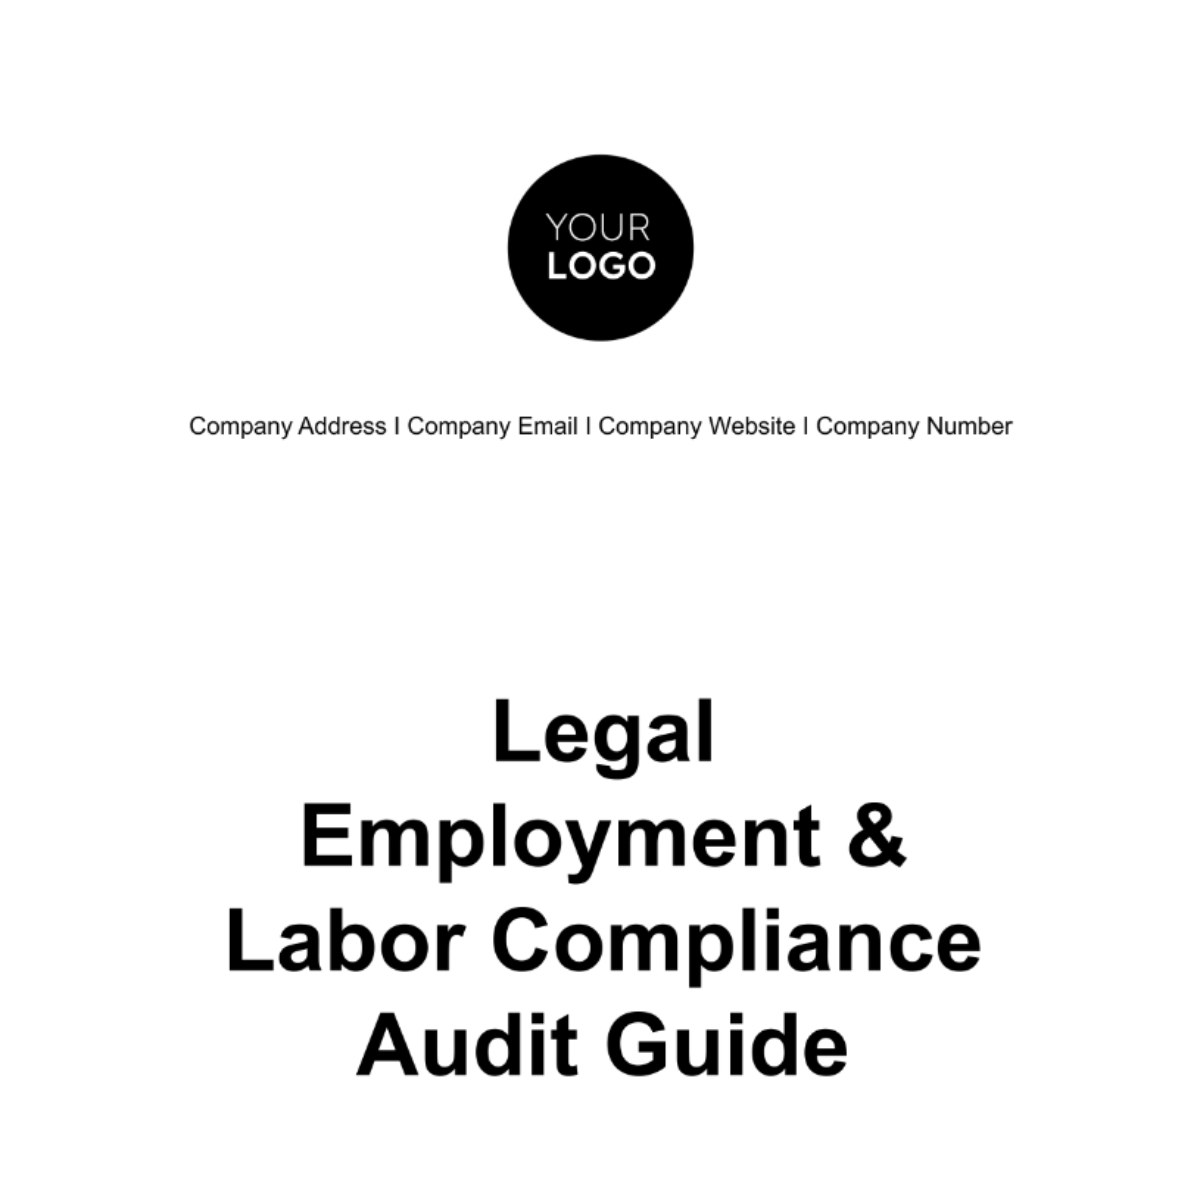 Free Legal Employment & Labor Compliance Audit Guide Template